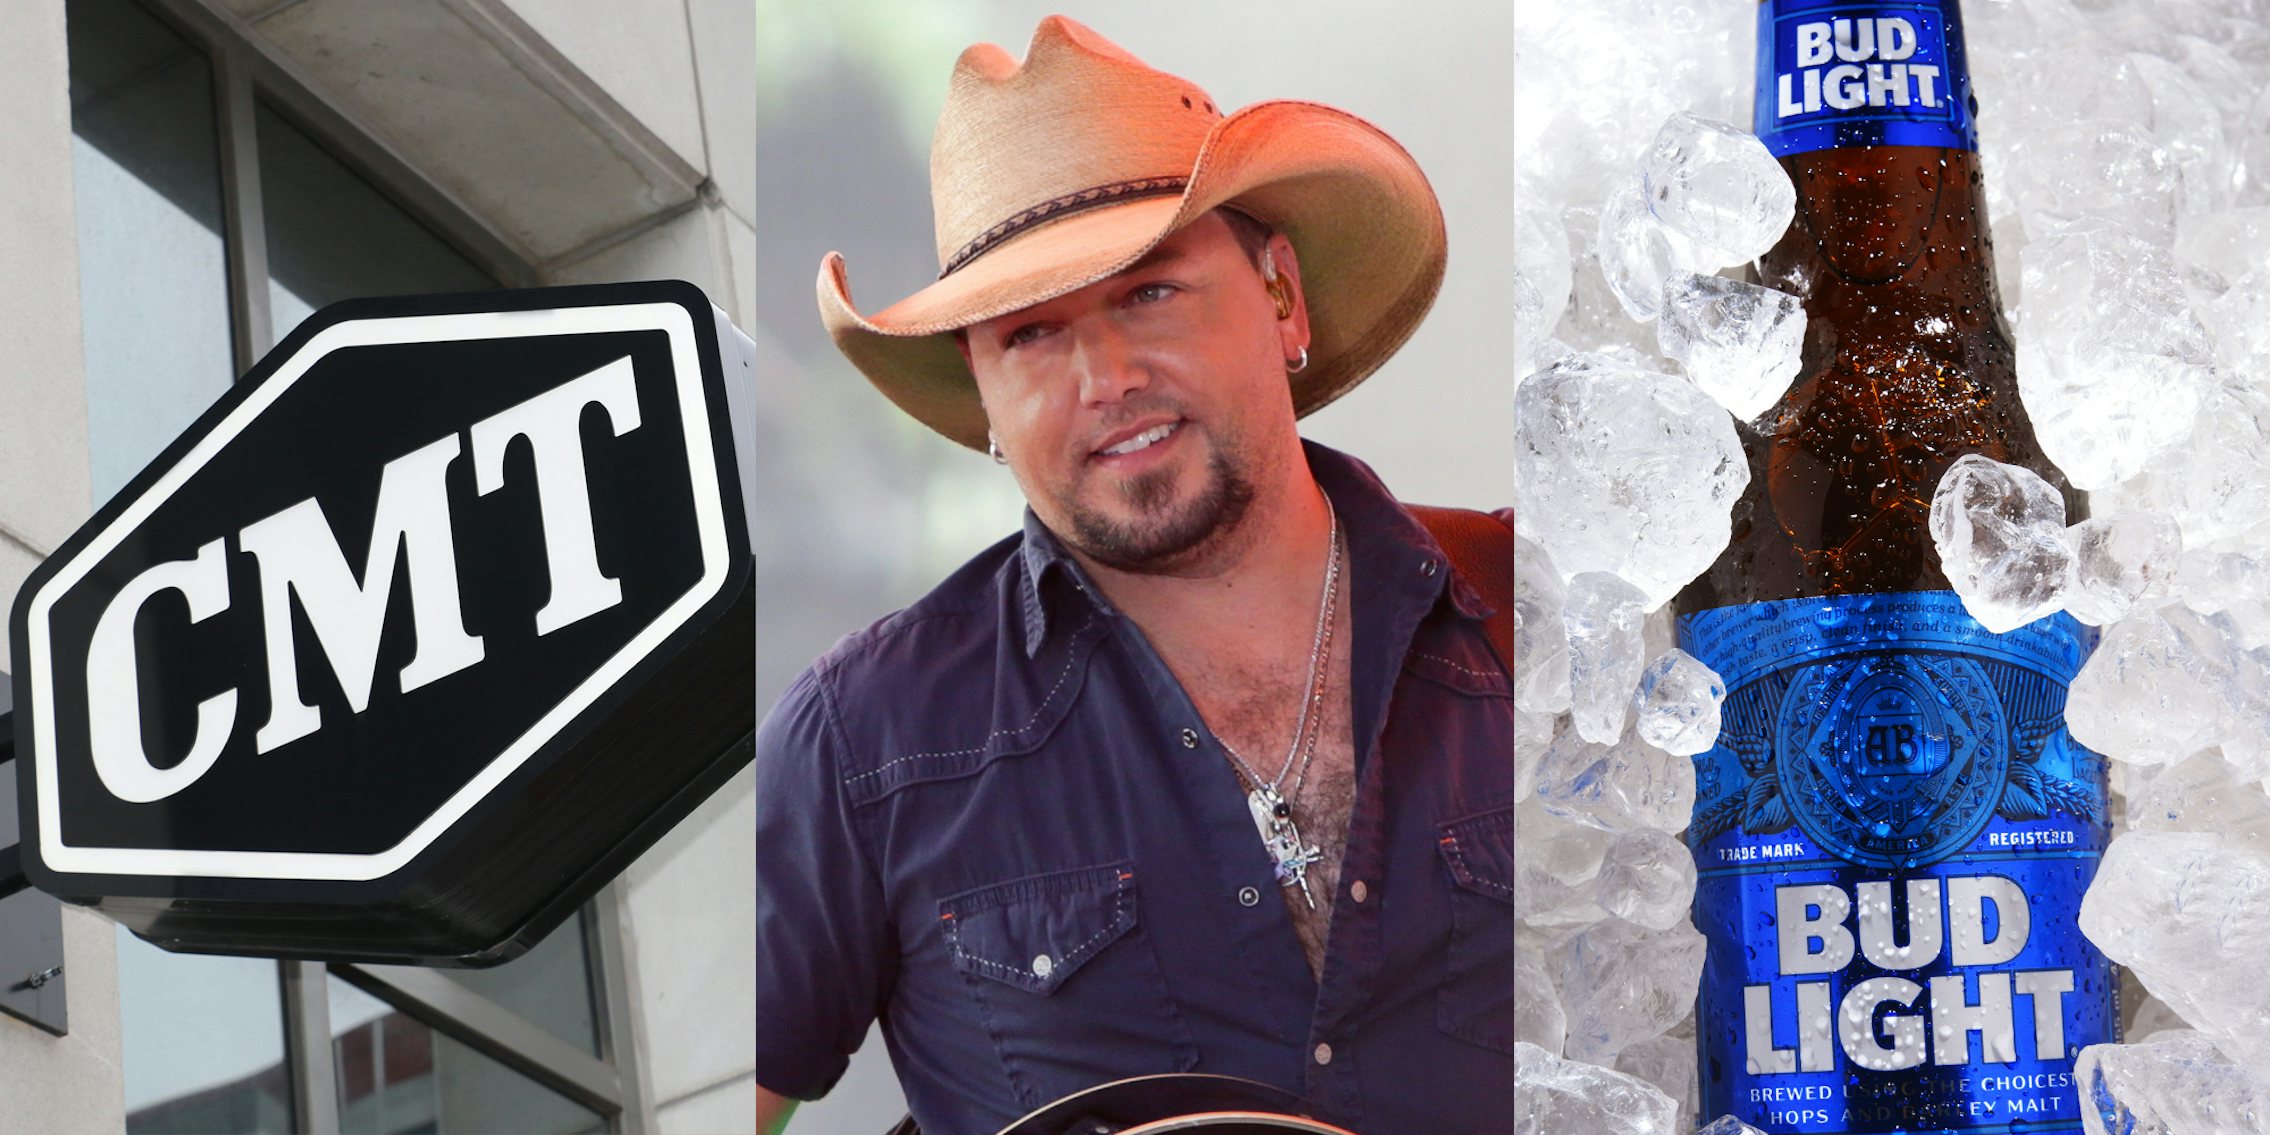 Country Music Television sign outside building (l) Jason Aldean (c) Bud Light bottle in glass' (r)